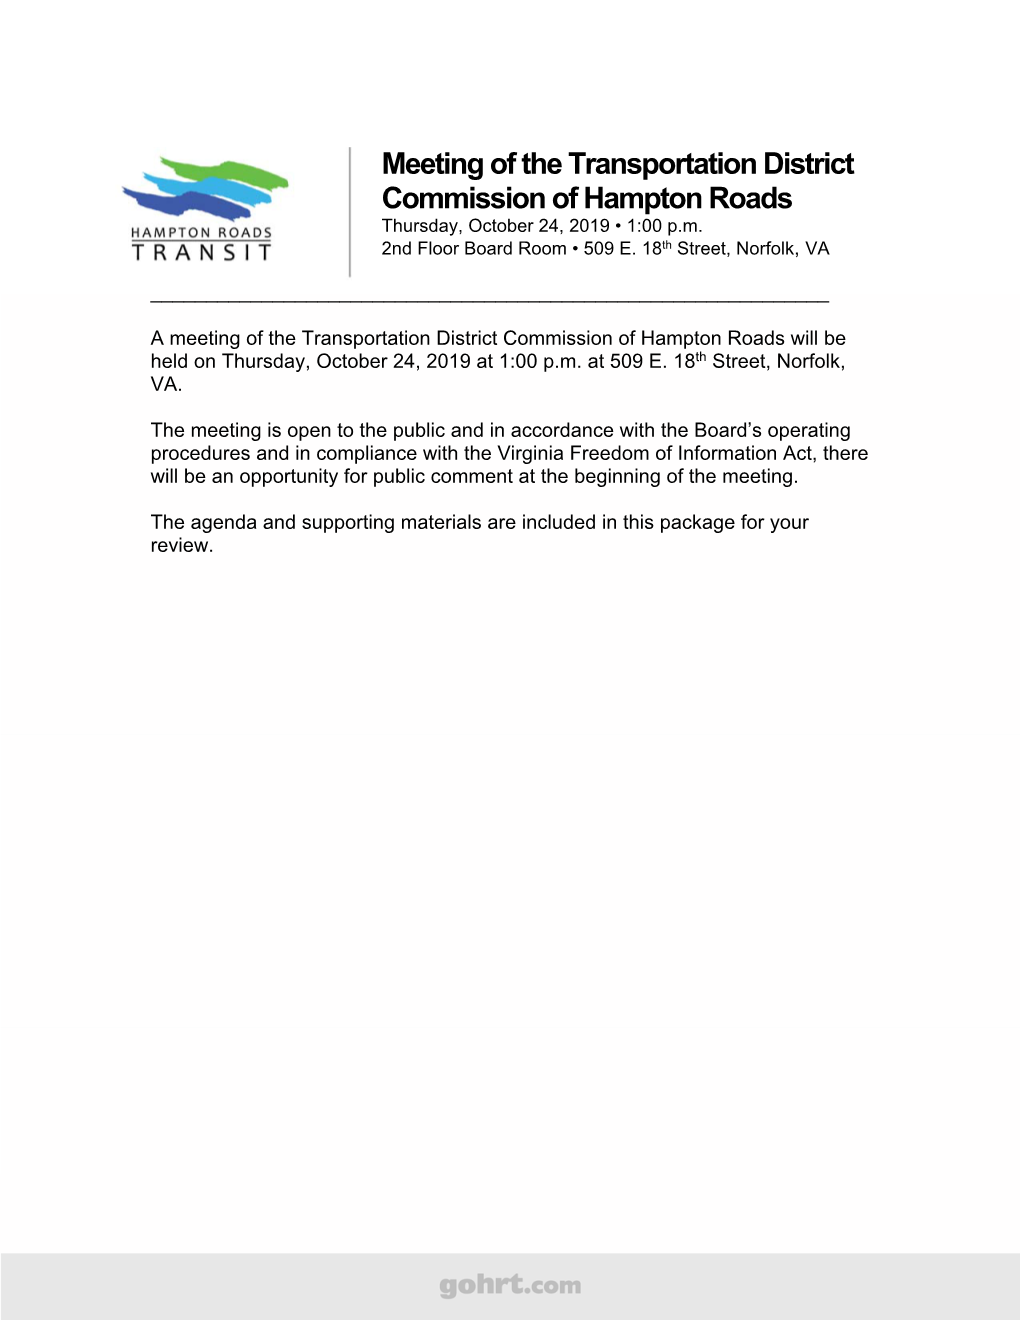 Meeting of the Transportation District Commission of Hampton Roads Thursday, October 24, 2019 • 1:00 P.M